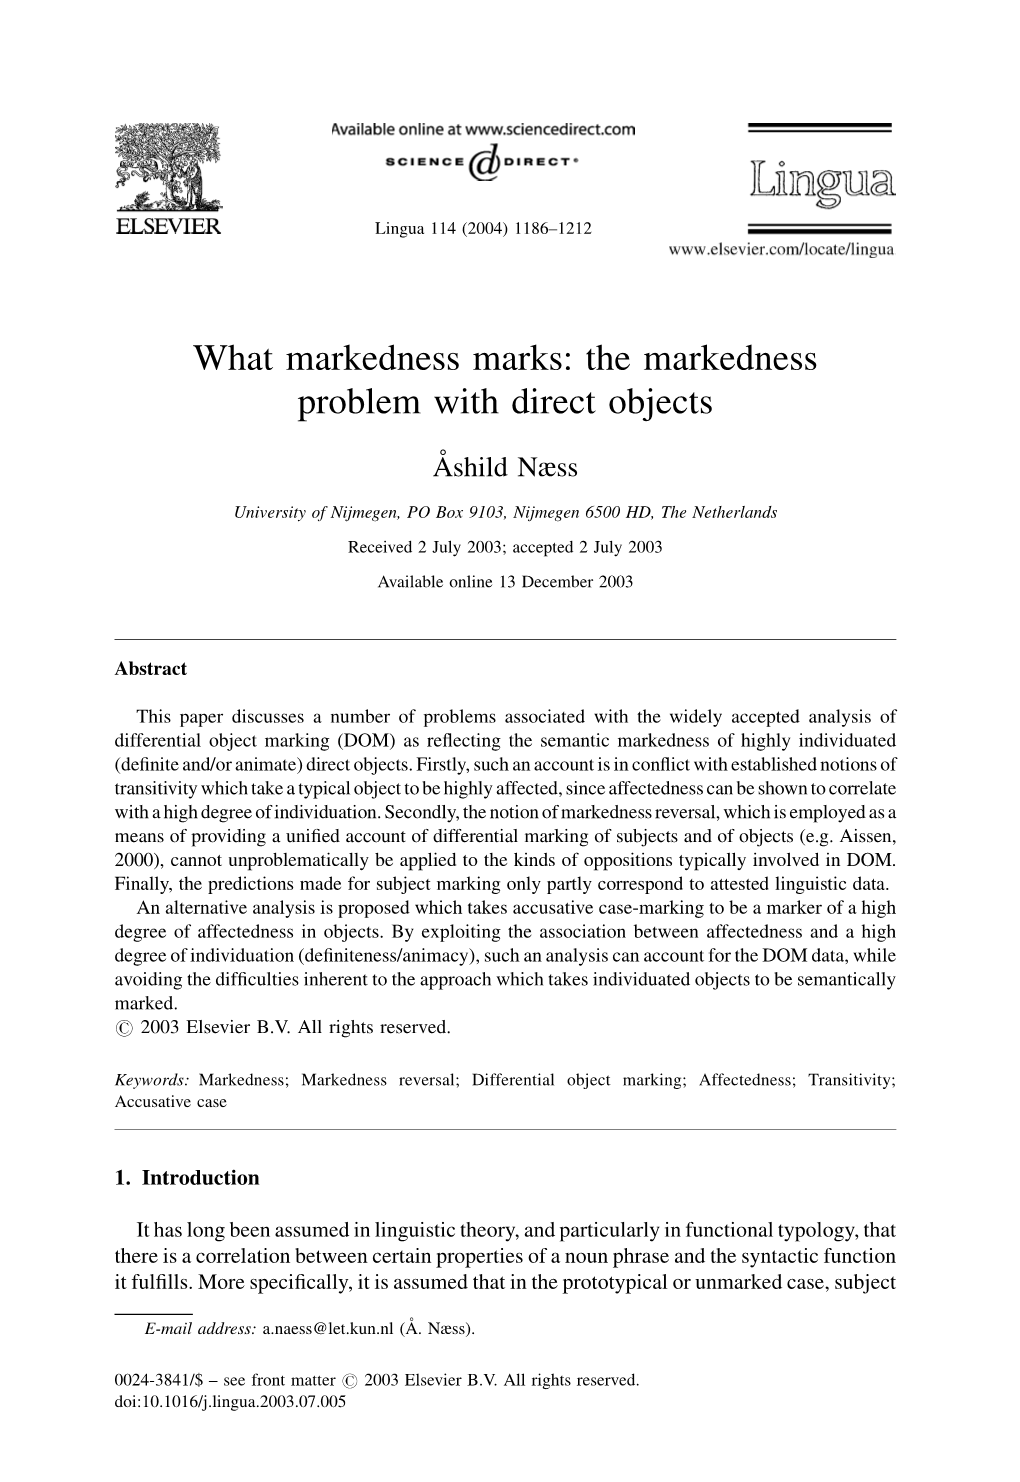 What Markedness Marks: the Markedness Problem with Direct Objects